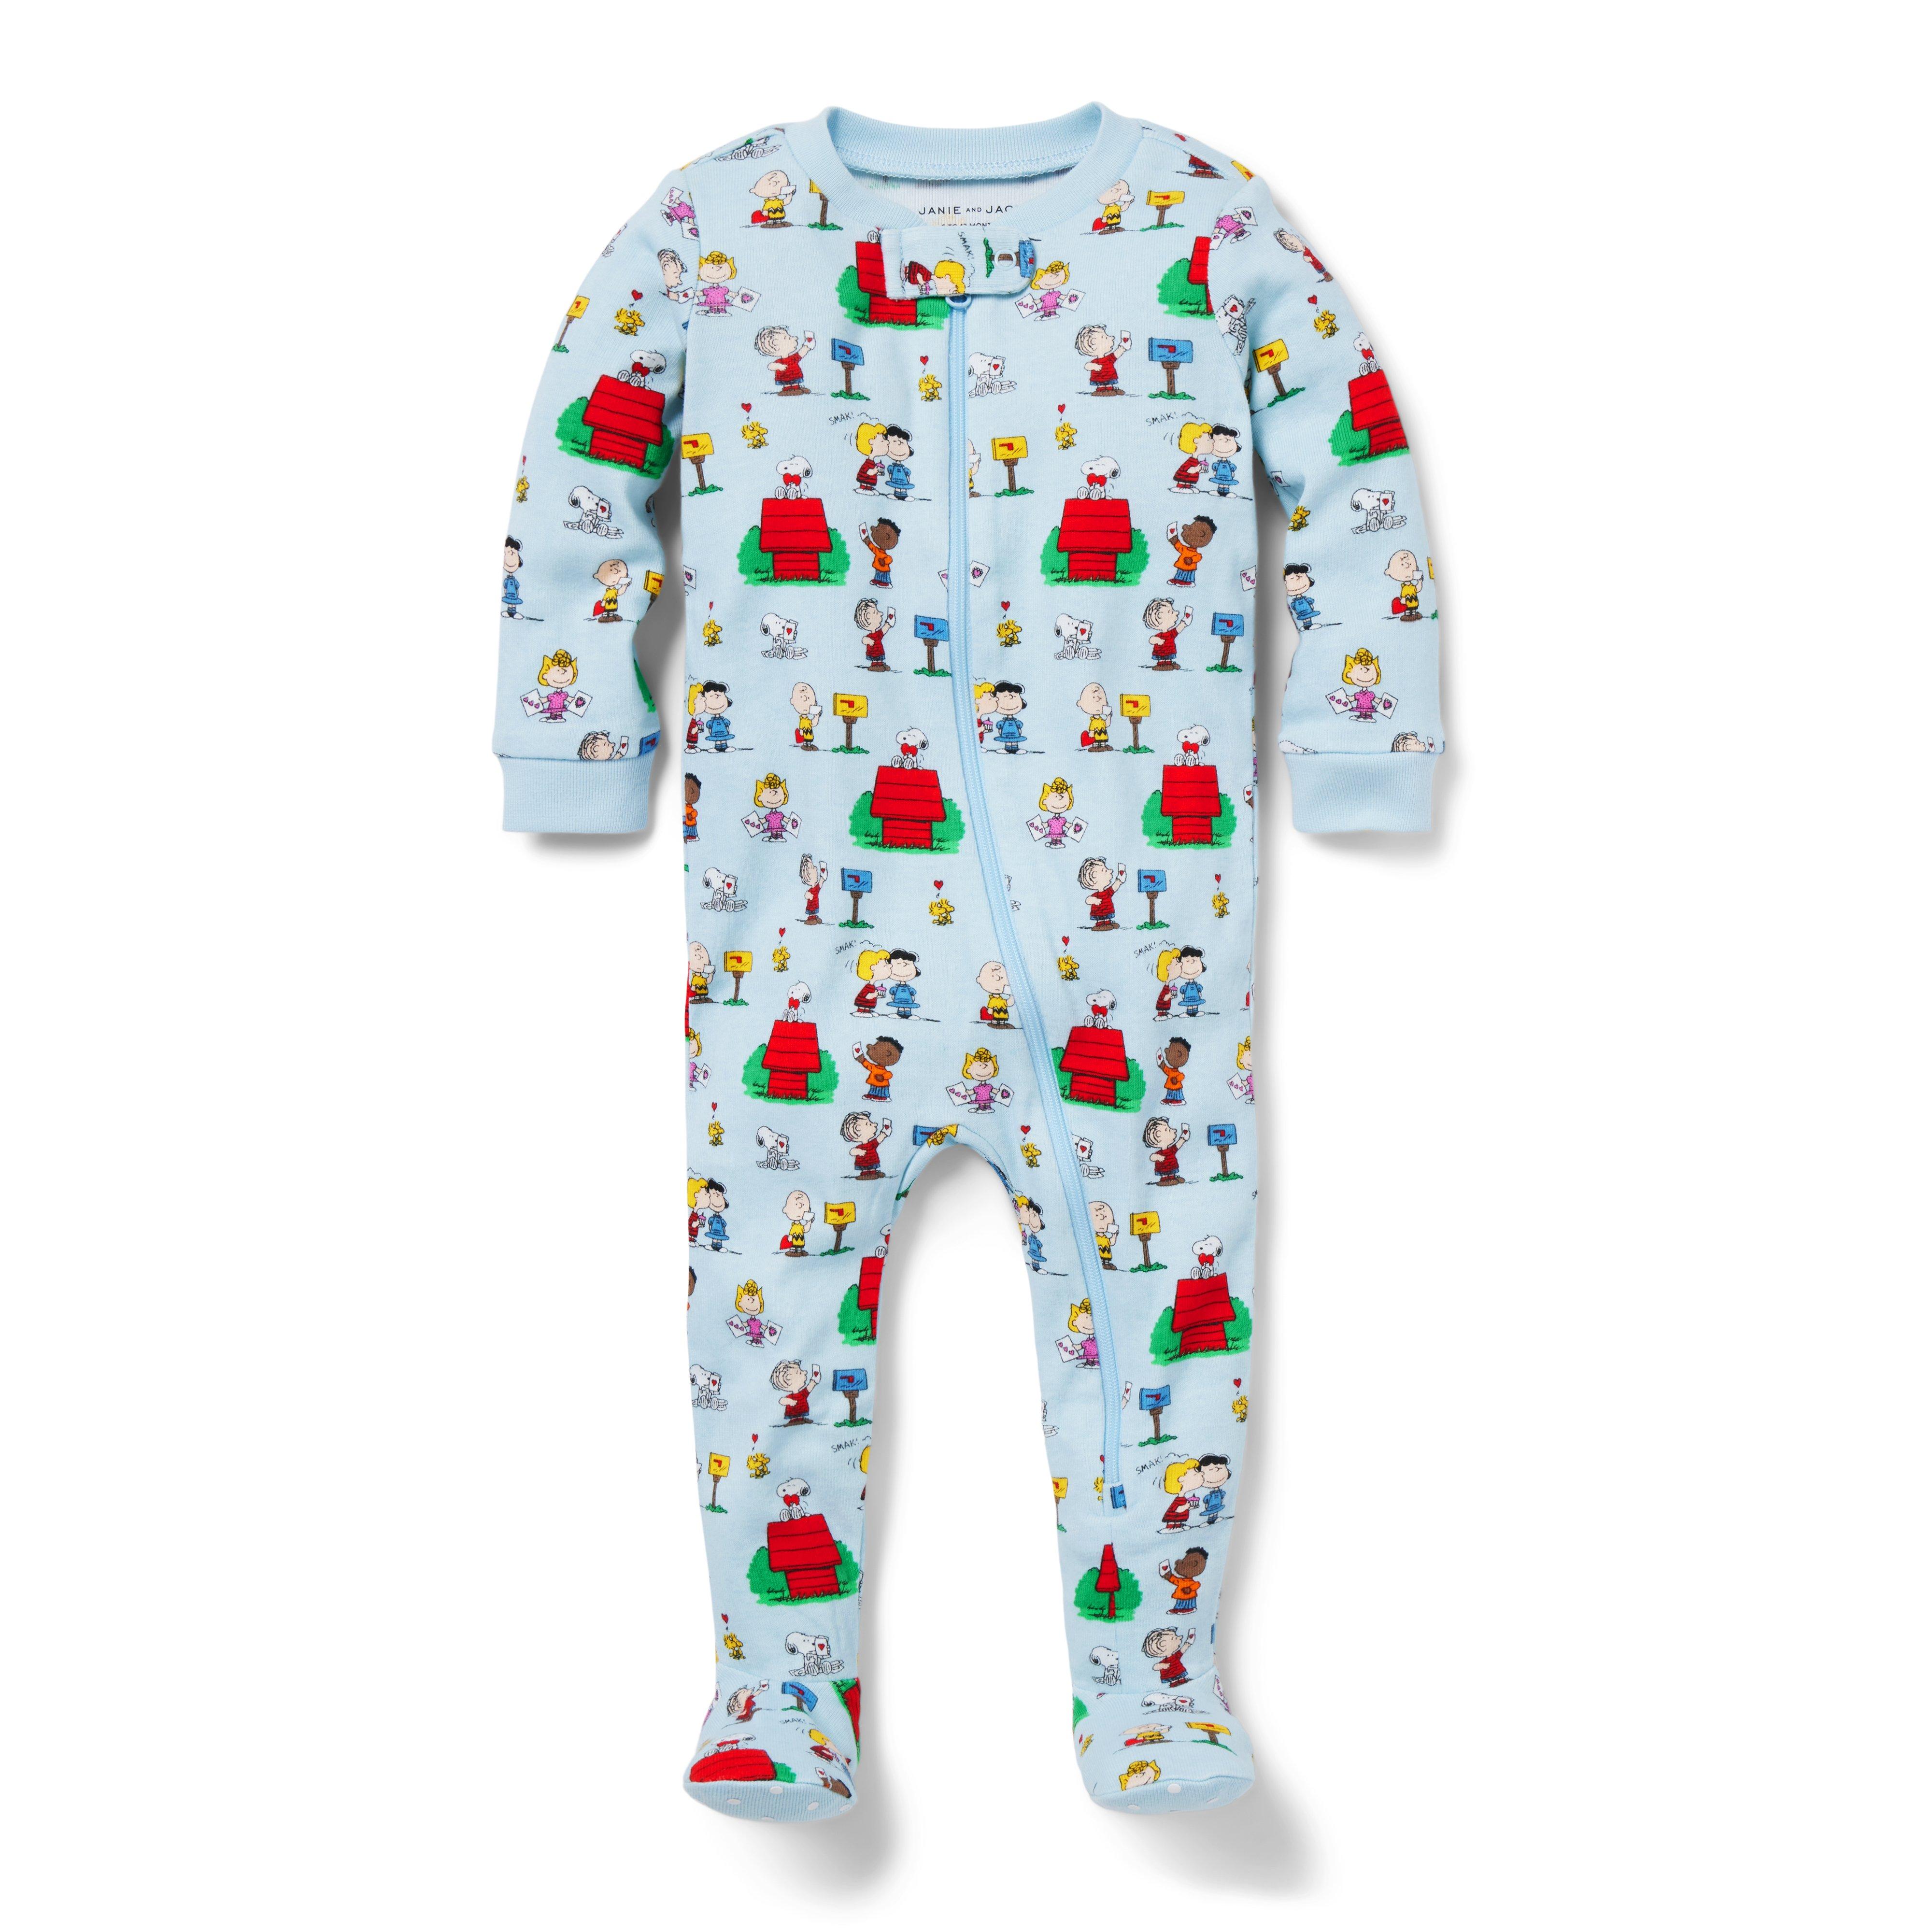 Baby Good Night Footed Pajamas in PEANUTS Valentine Friends image number 0